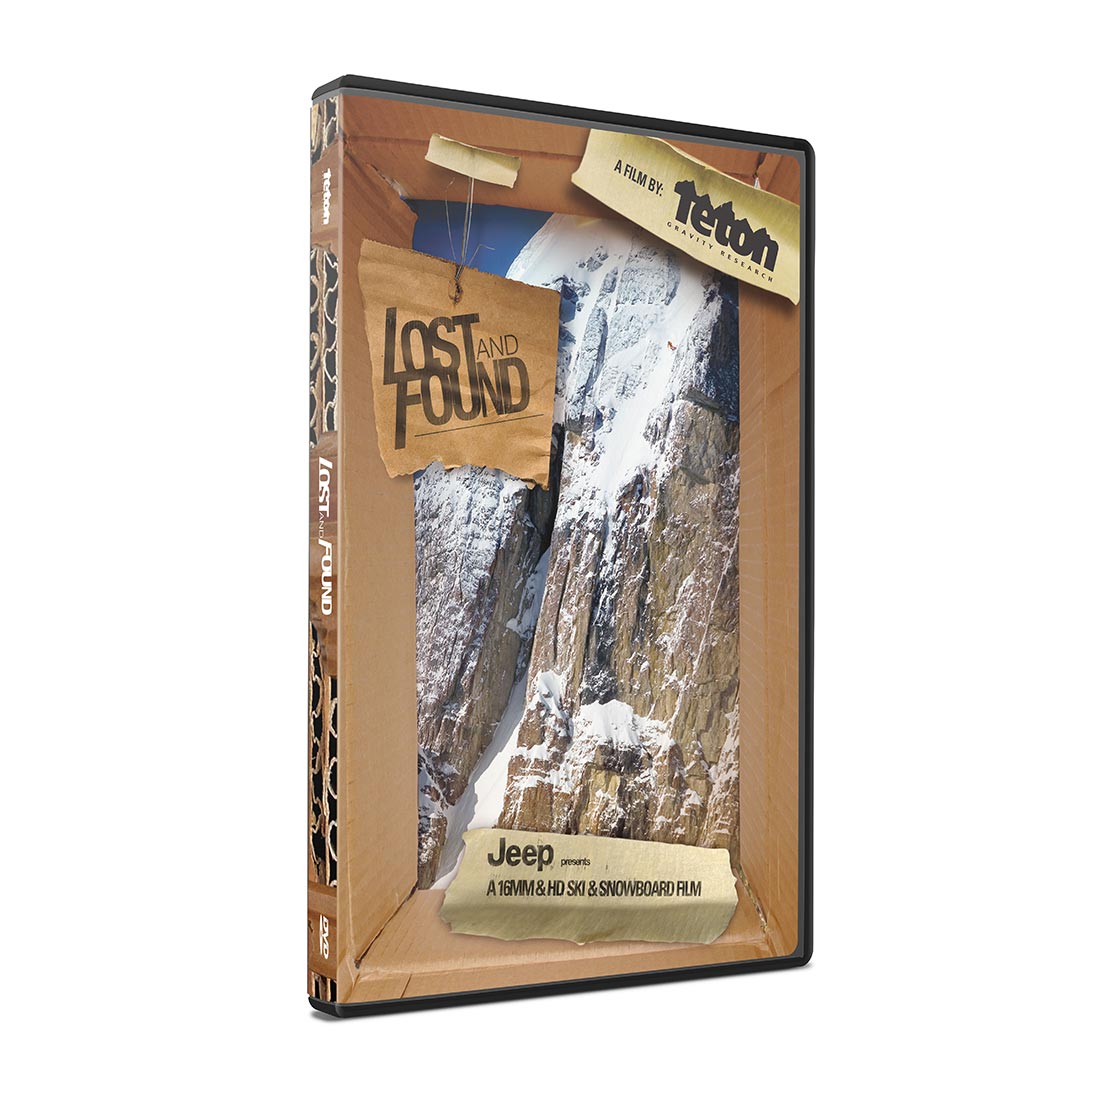 Lost and Found DVD - Teton Gravity Research